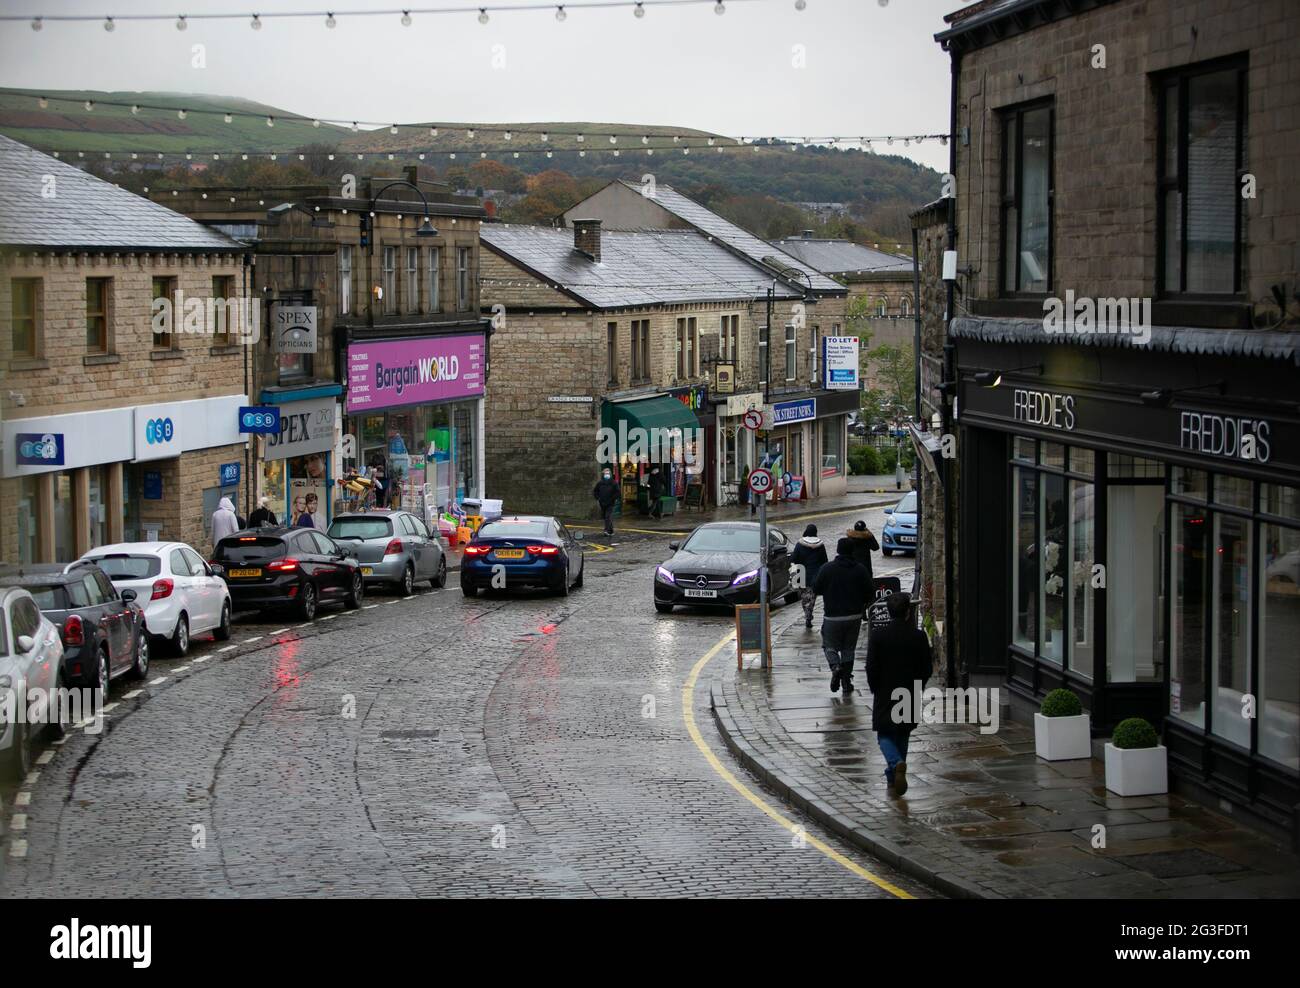 The town of Rawenstall in Lancashire, which is in the constituency of Rossendale and Darwen. The local MP for the area is the Conservative politician Stock Photo